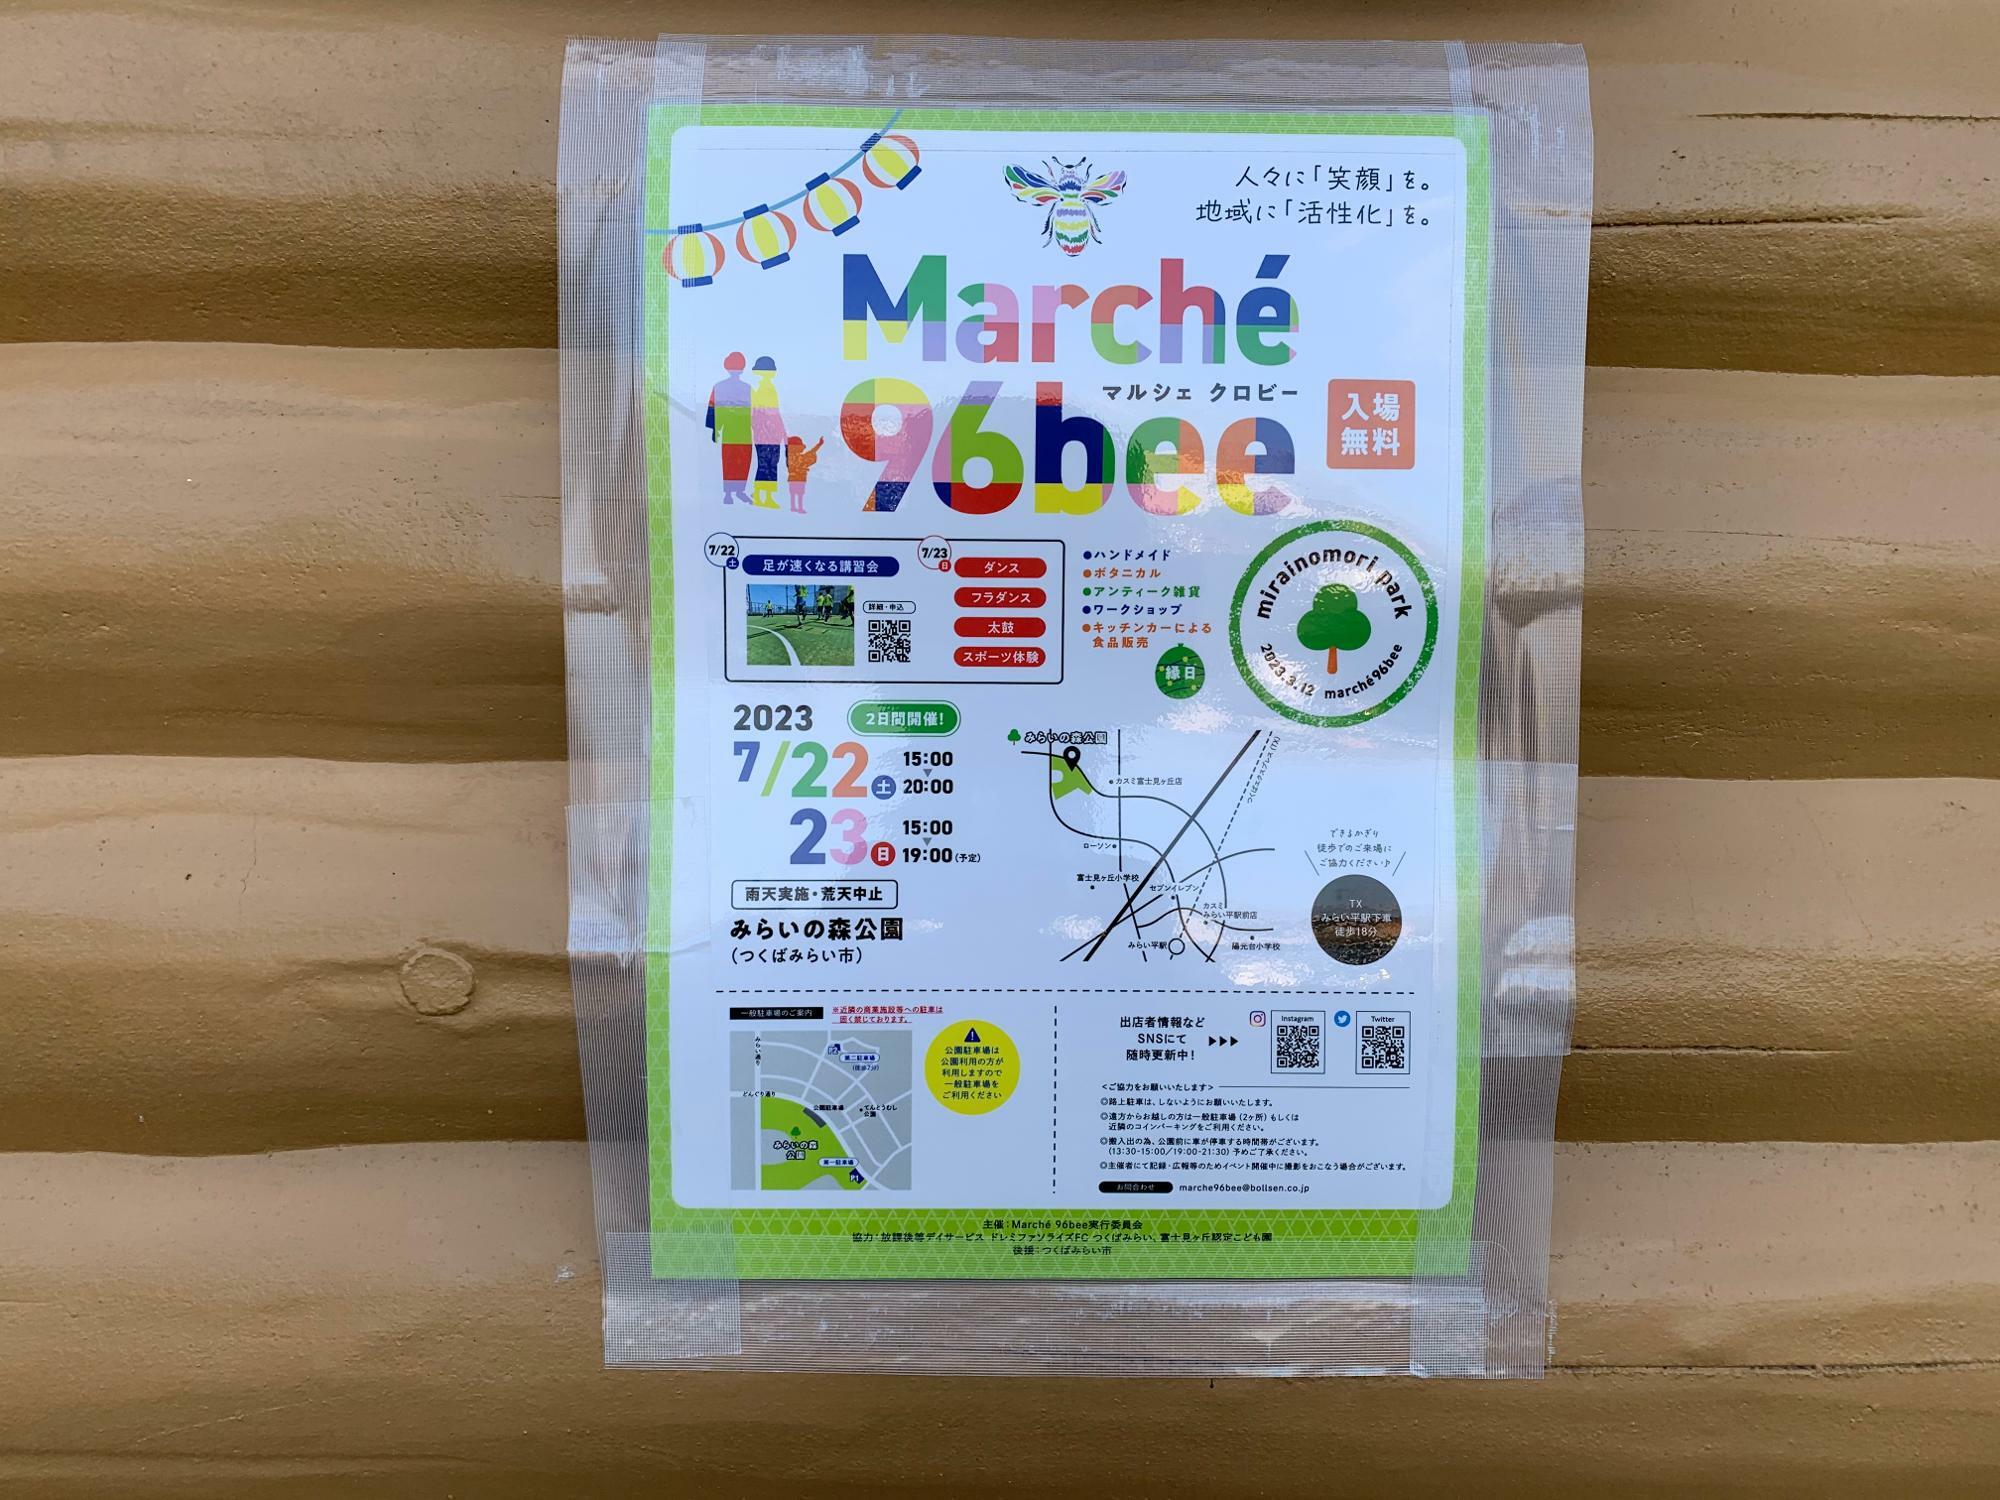 marché96bee ポスター